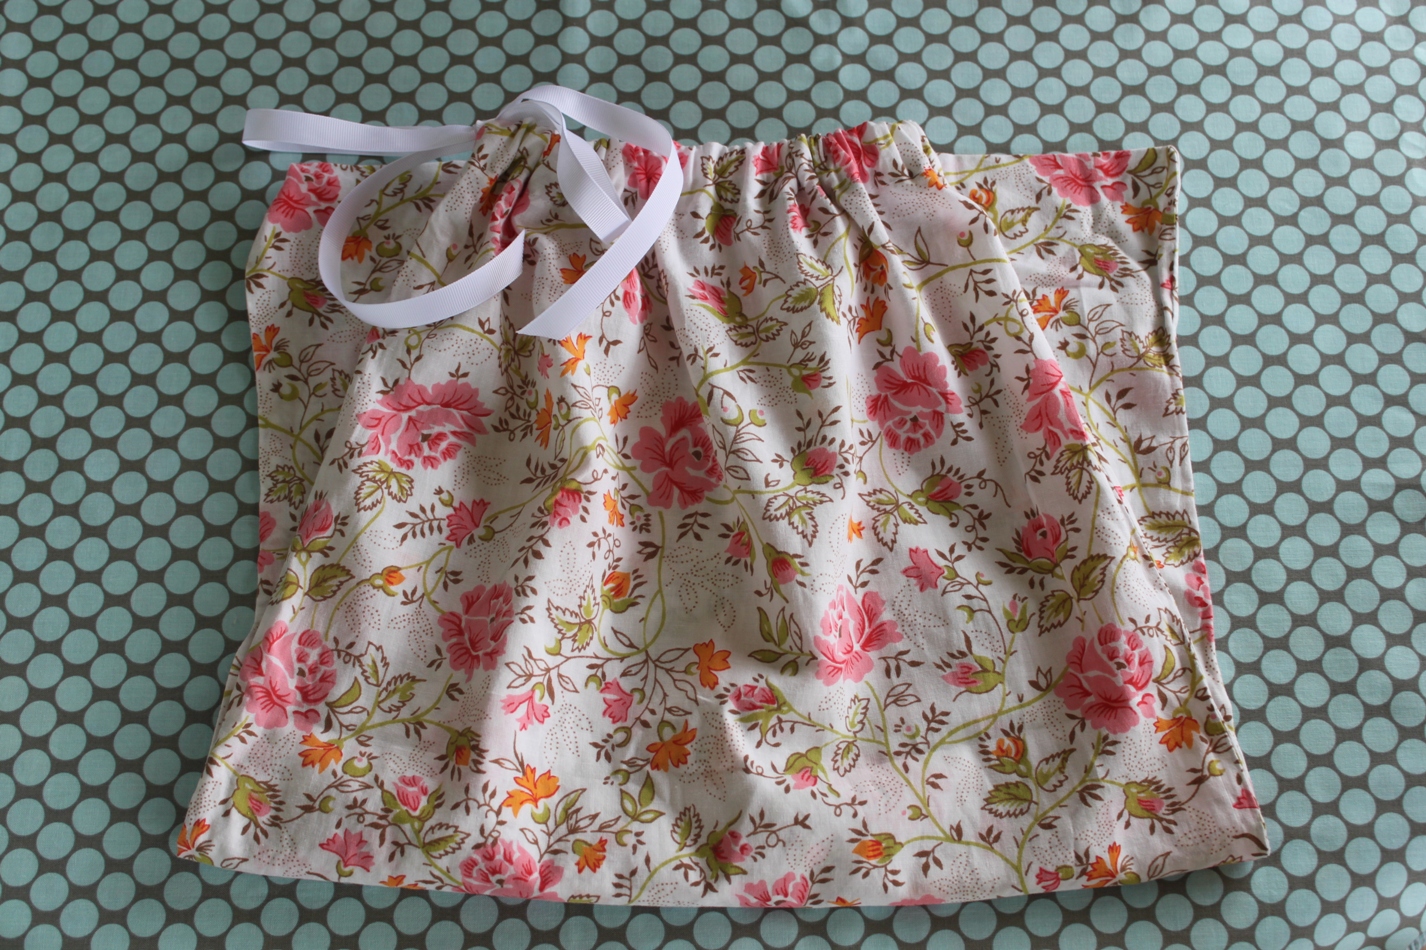 How to make a pillowcase into a bag finished